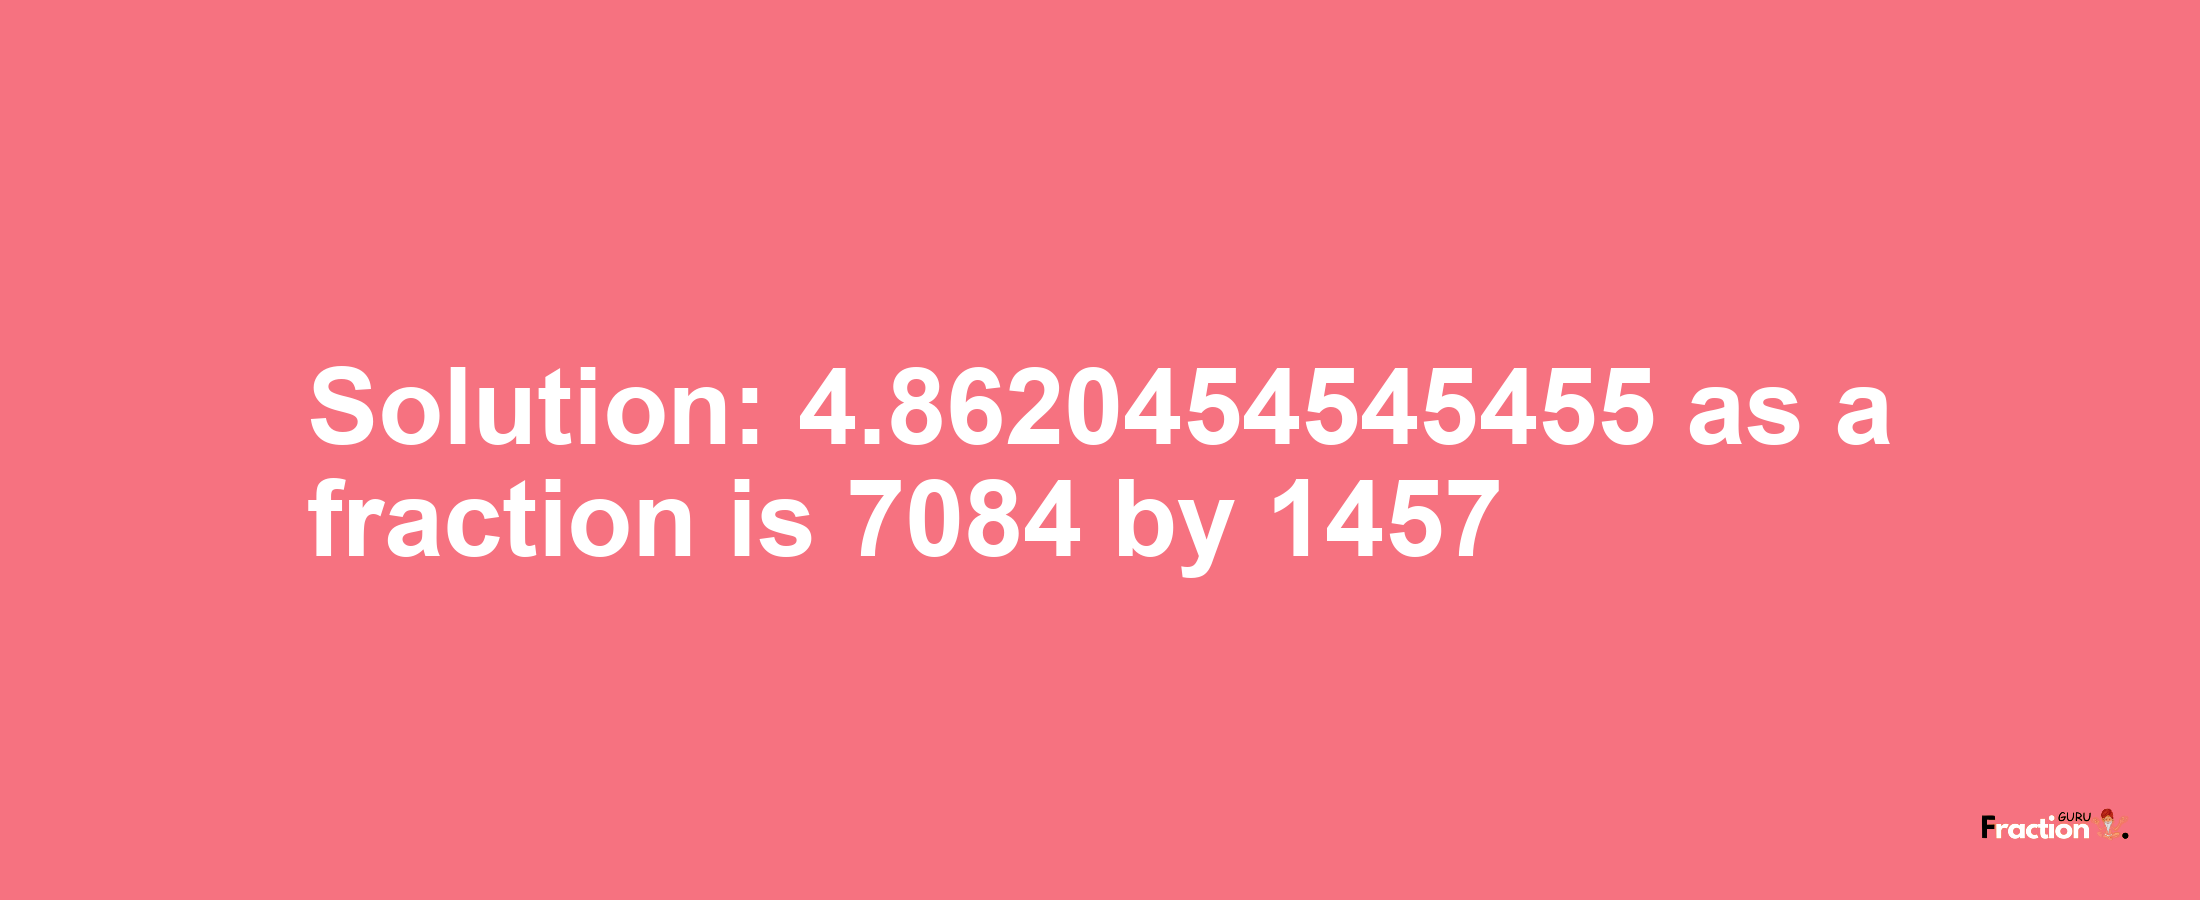 Solution:4.8620454545455 as a fraction is 7084/1457